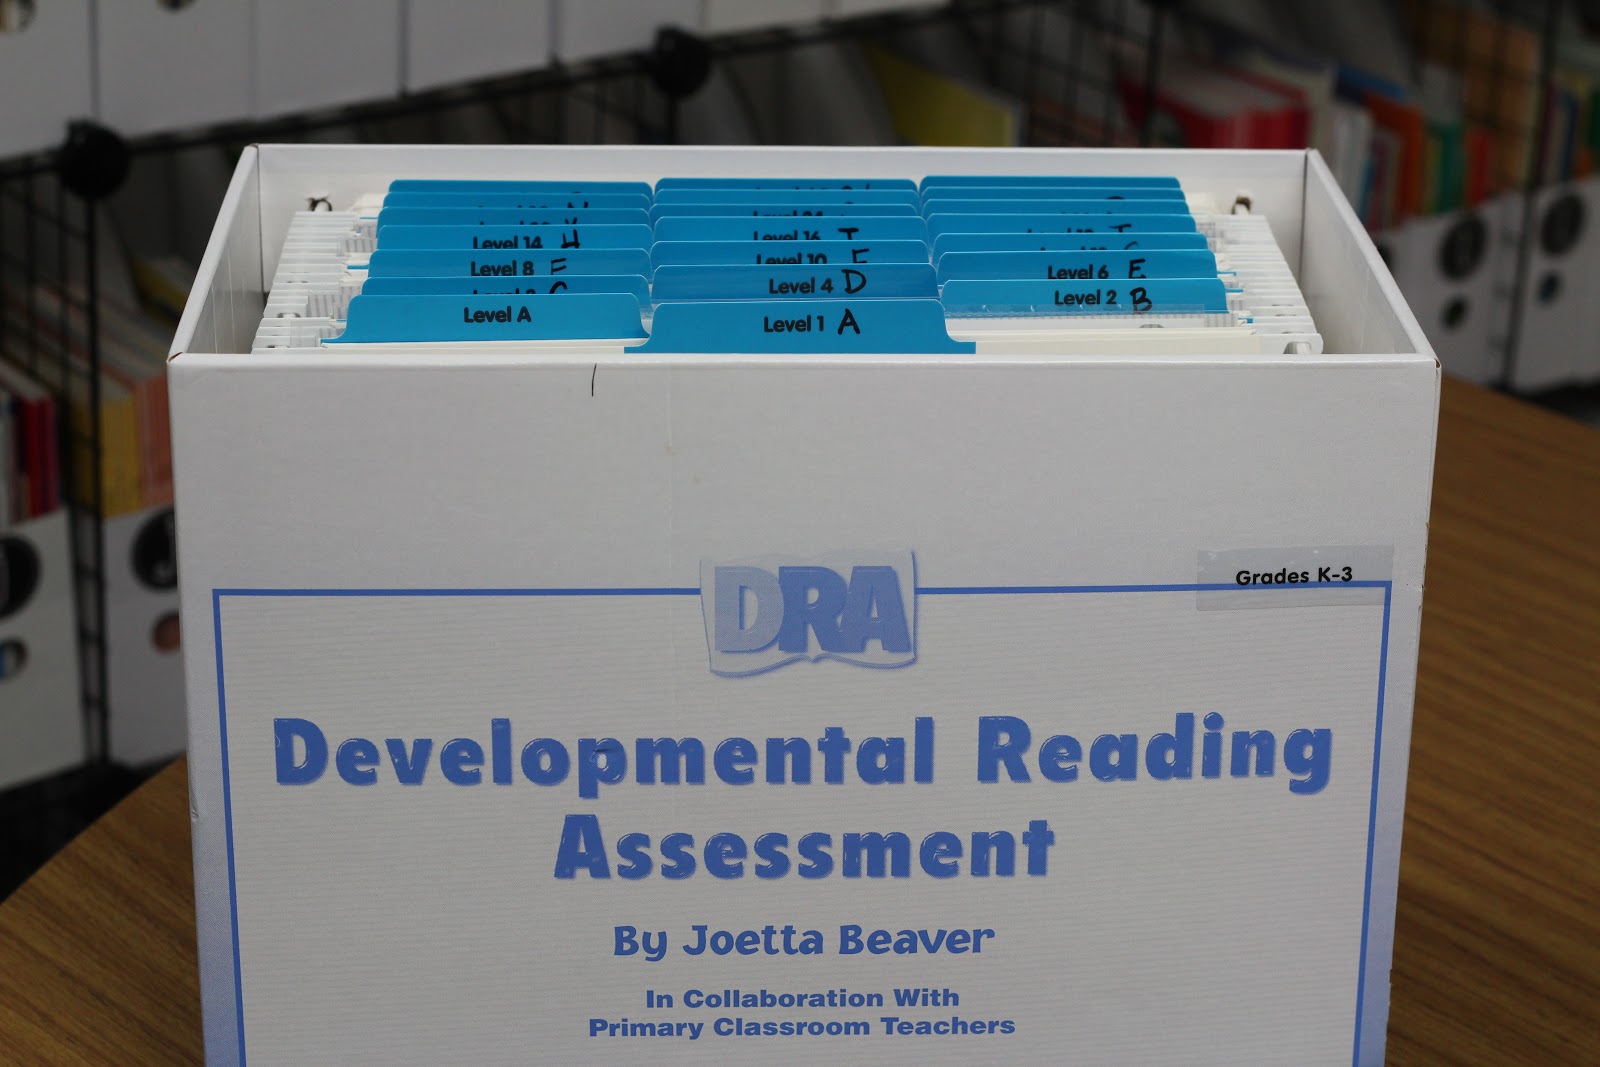 What are some developmental reading assessments?